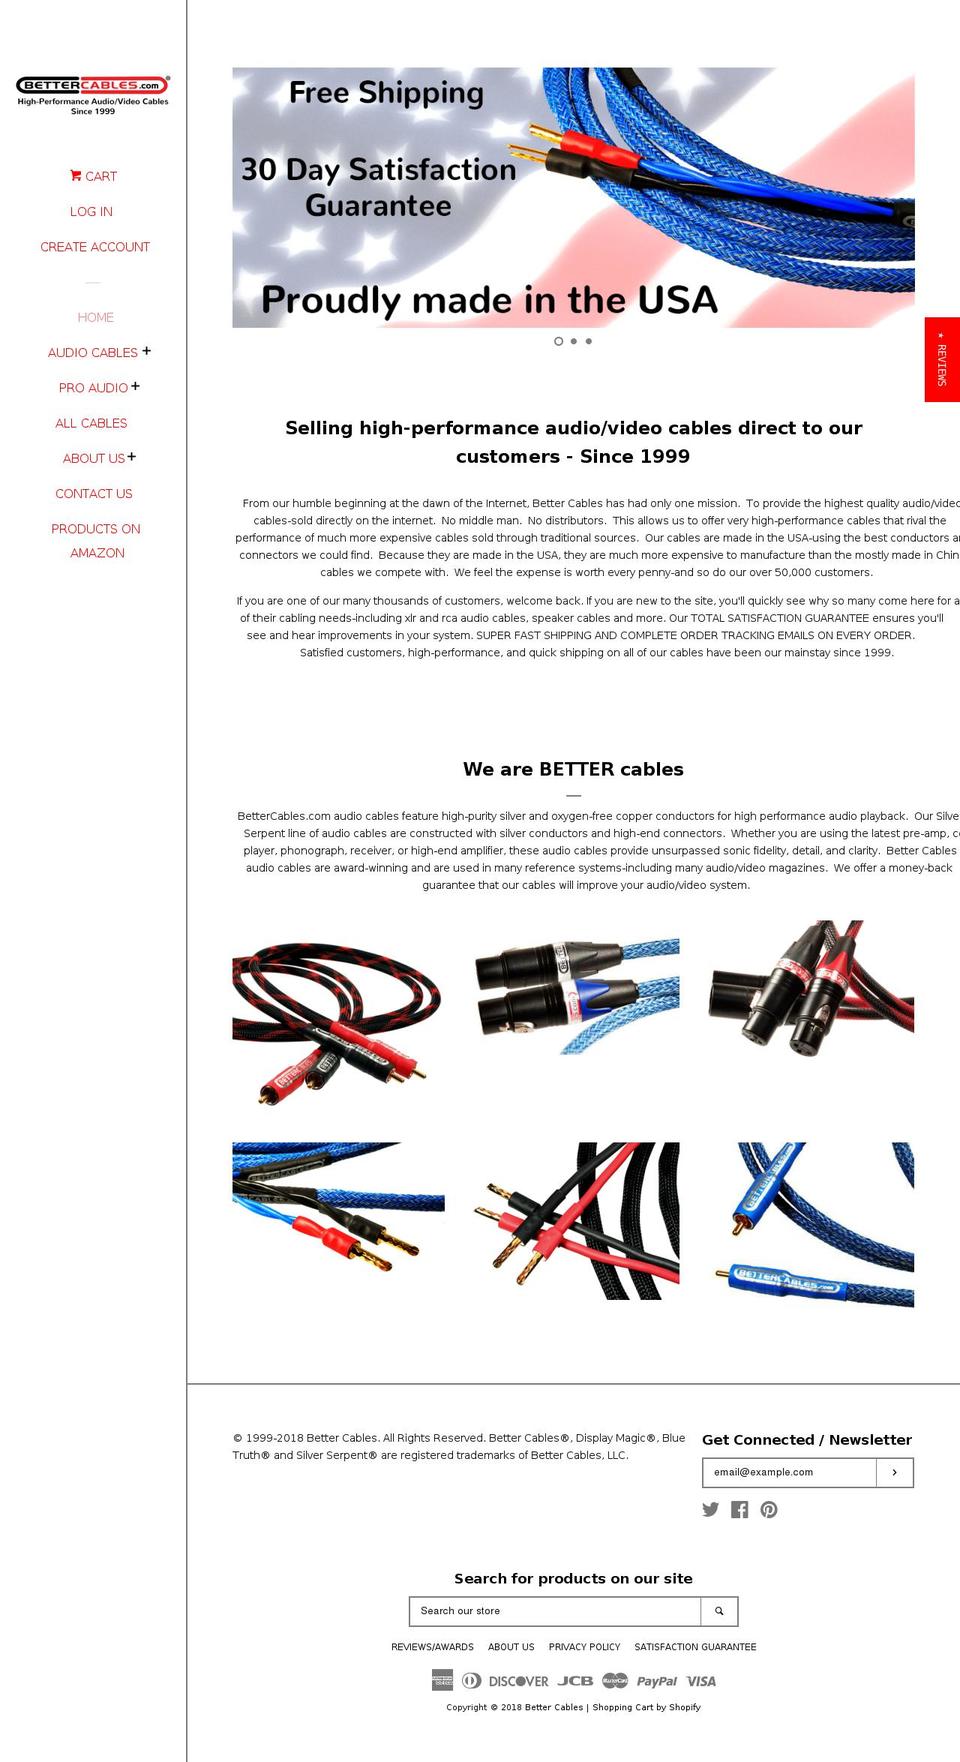 Current Theme - Pop Shopify theme site example bettercables.info